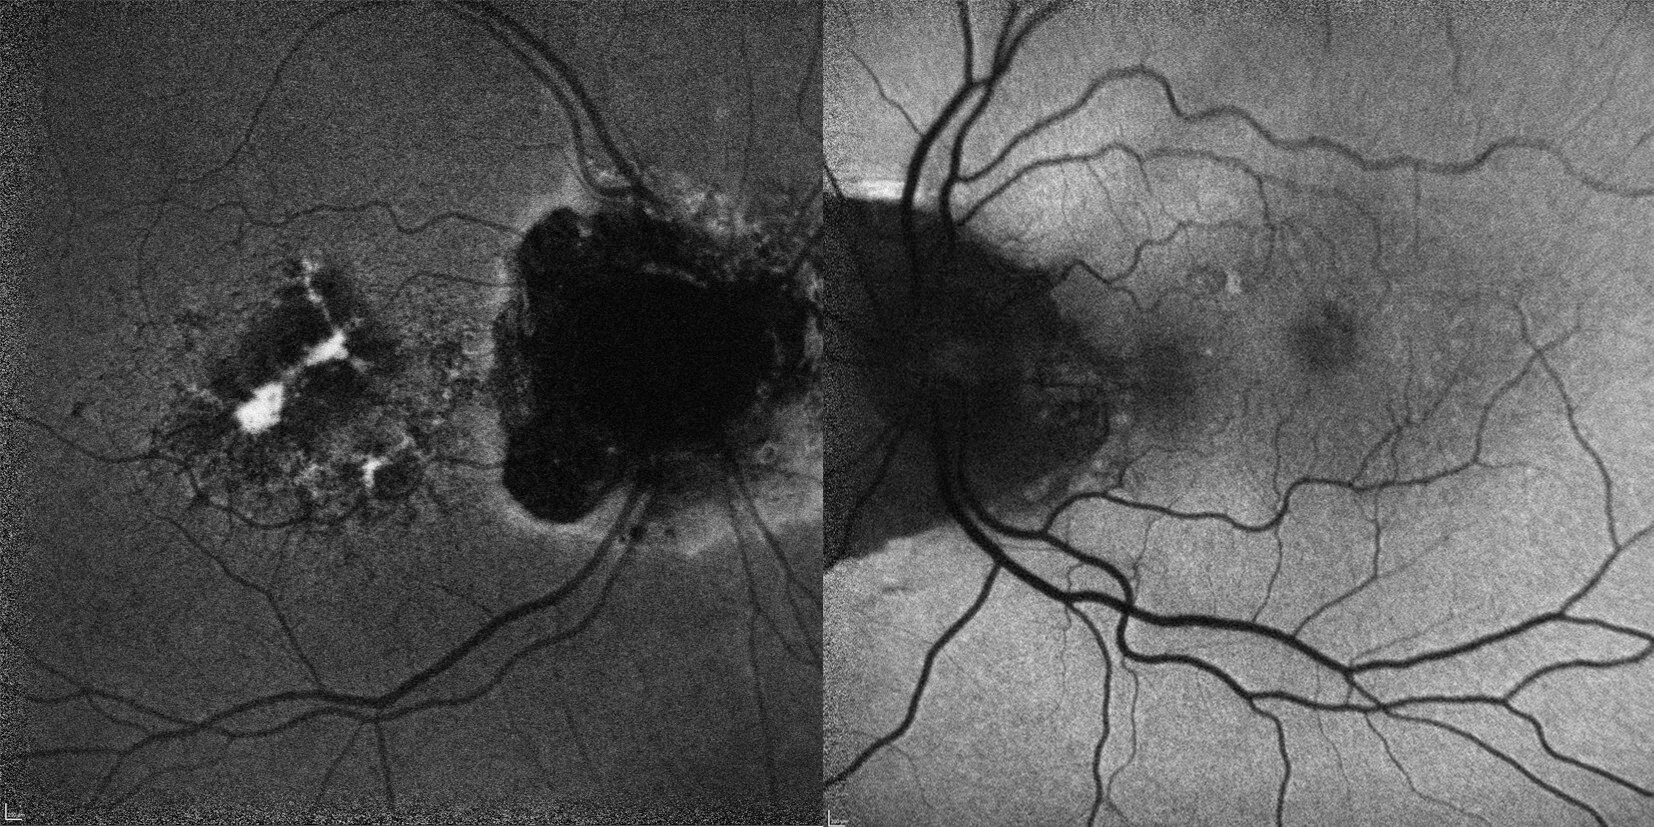 Autofluorescence is altered in the area of macula drusen and peripapillary regions of both eyes.